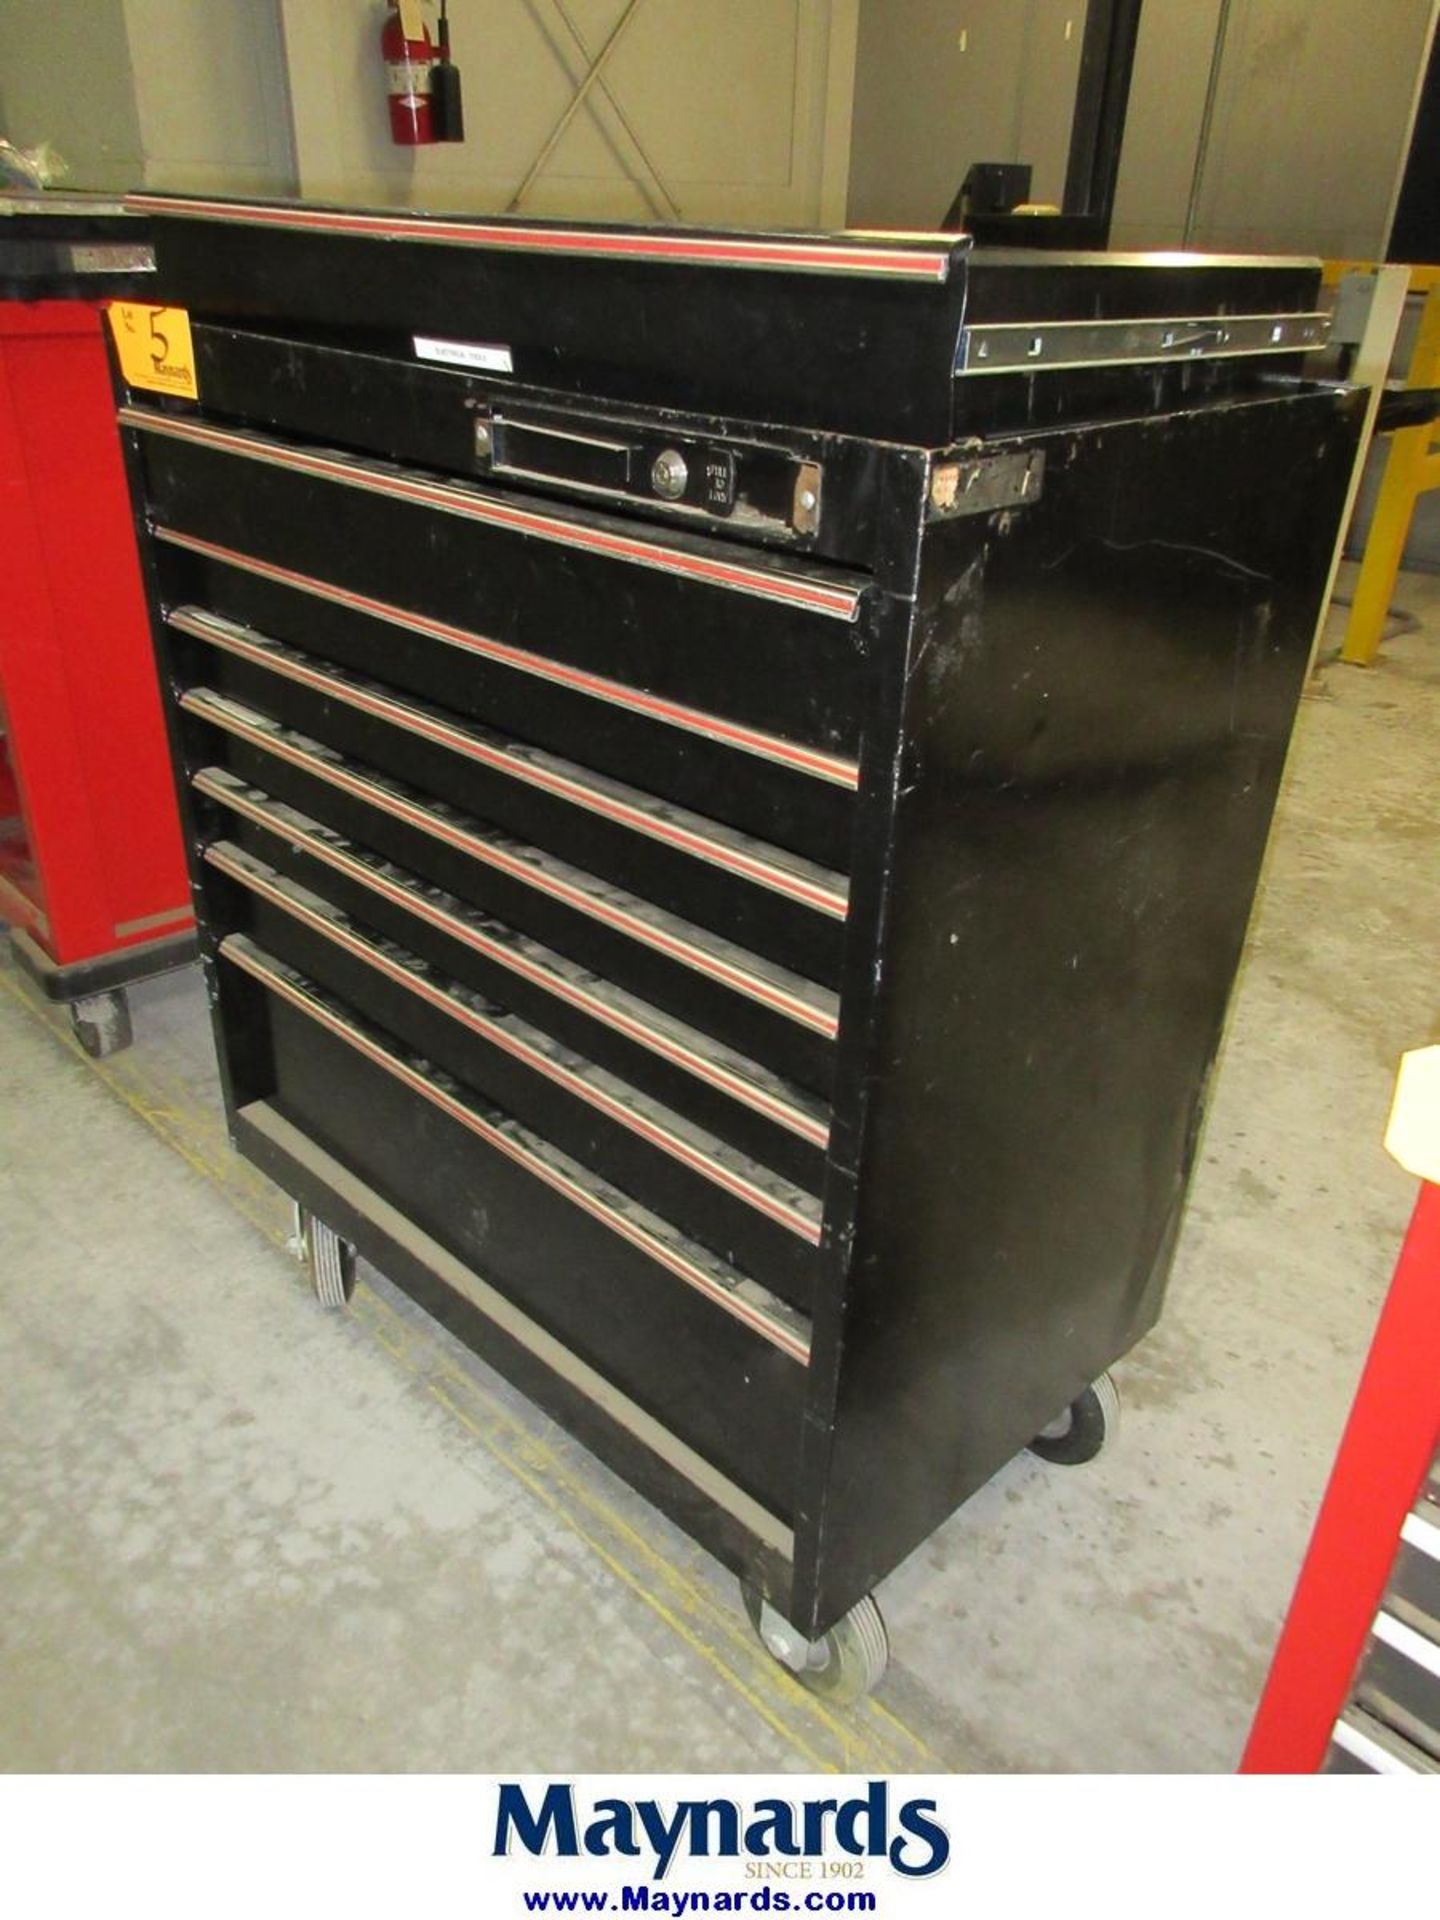 Craftsman 706.65437 36" 7-Drawer Open-Top Toolbox - Image 2 of 2